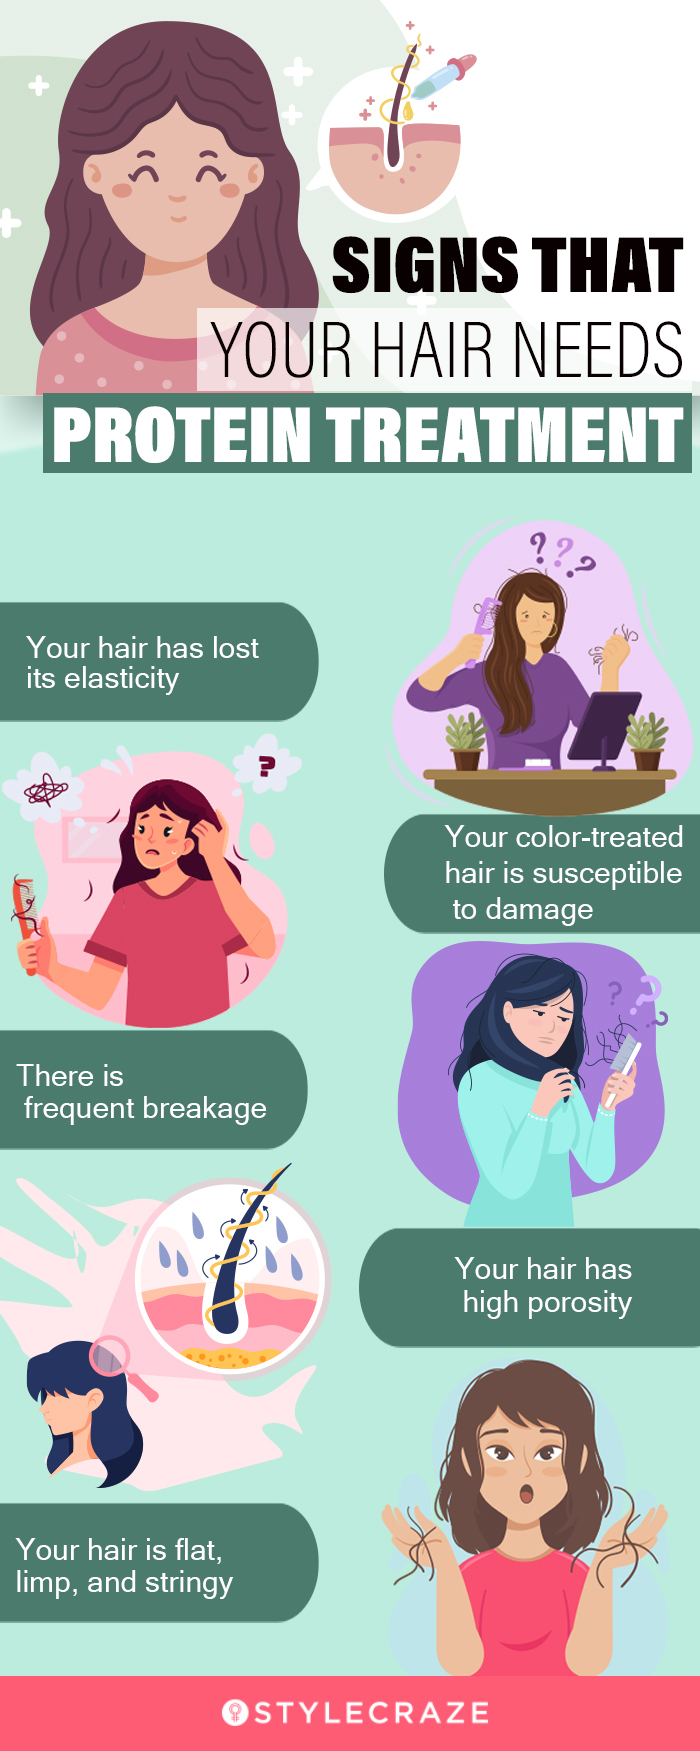 signs that your hair needs protein treatment(infographic)